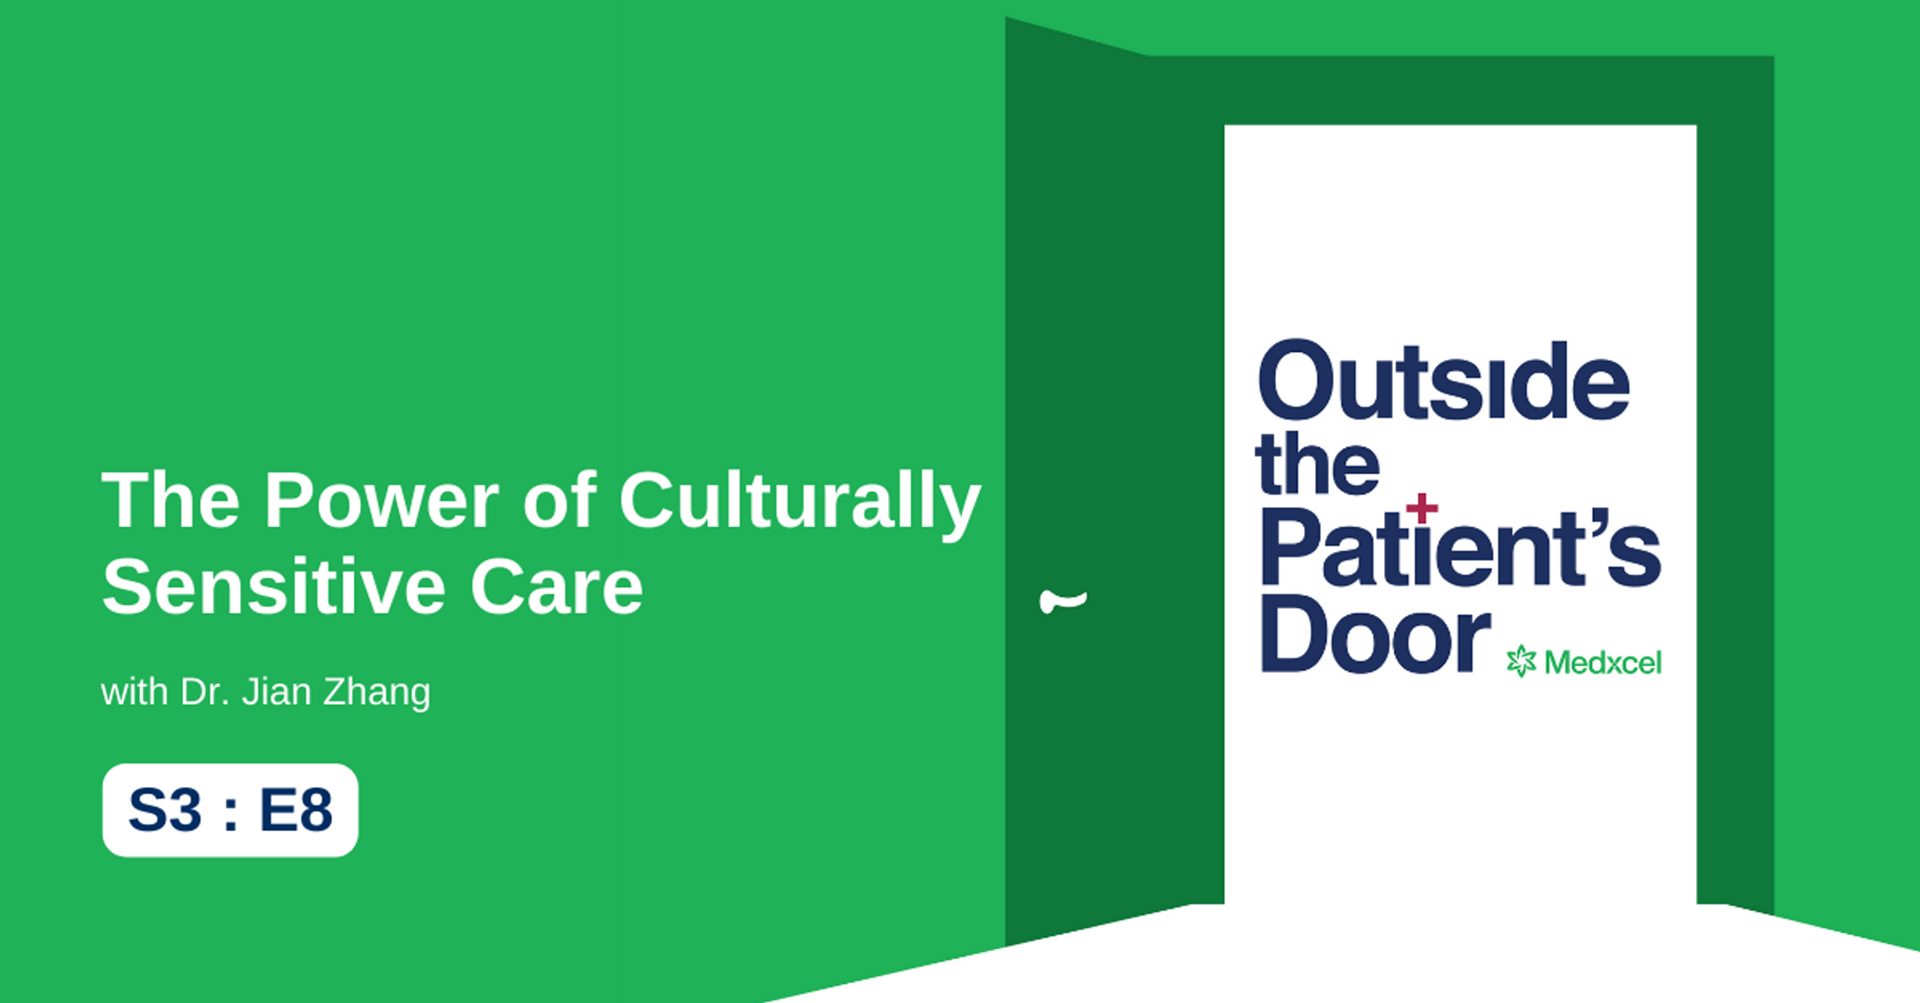 S3 E8: The Power of Culturally Sensitive Care with Dr. Jian Zhang